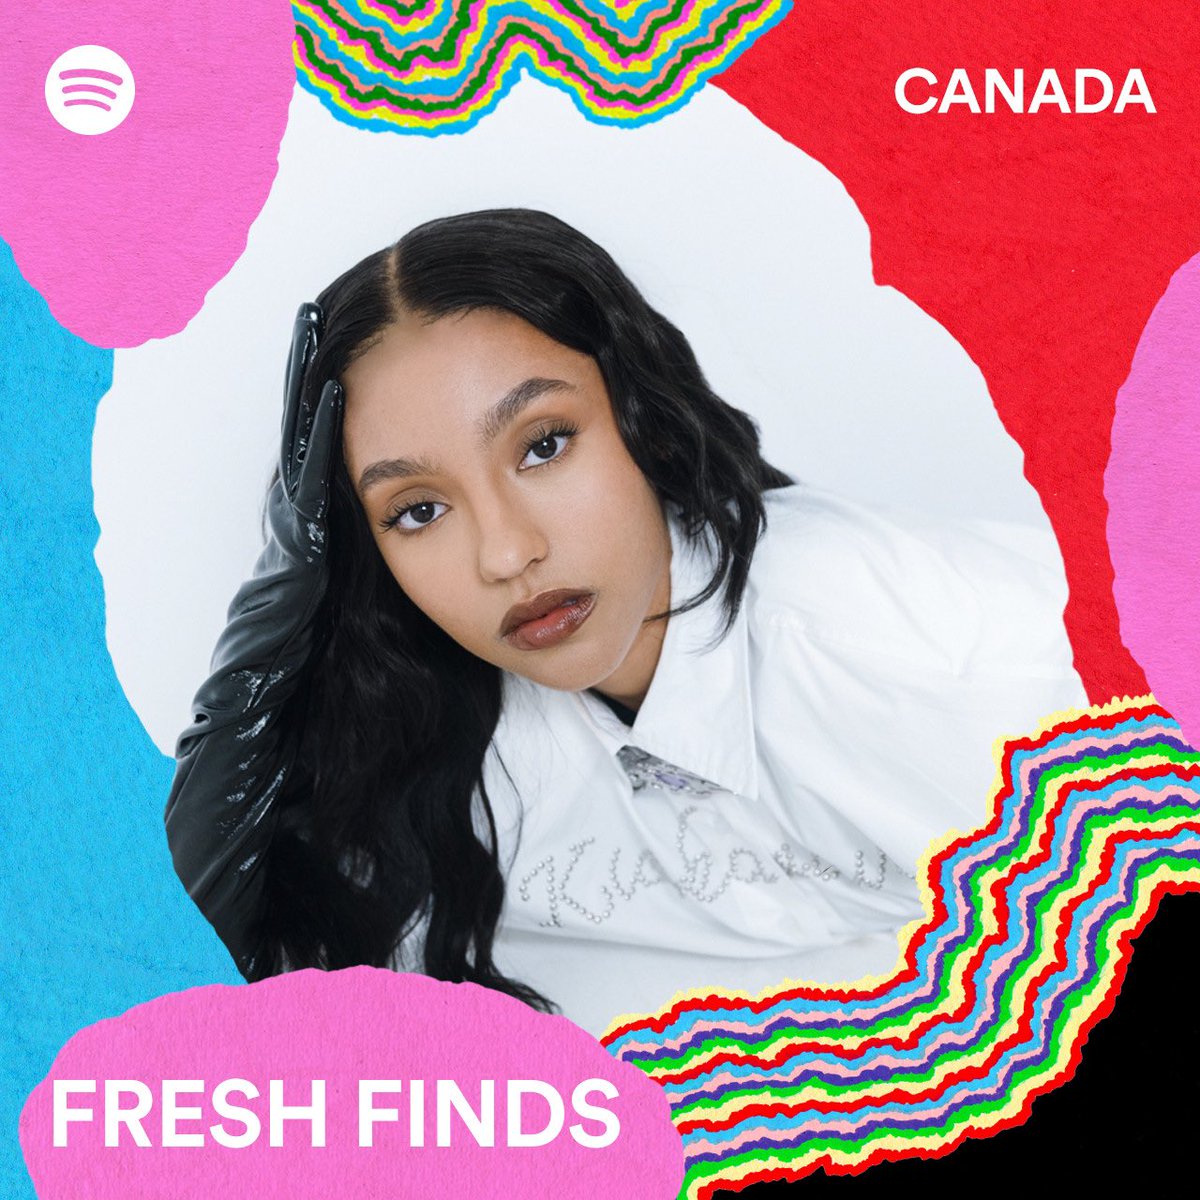 Much love to Spotify for making me the cover girl for this playlist and adding my song ‘Certainty Of Life’ 🥰🤍